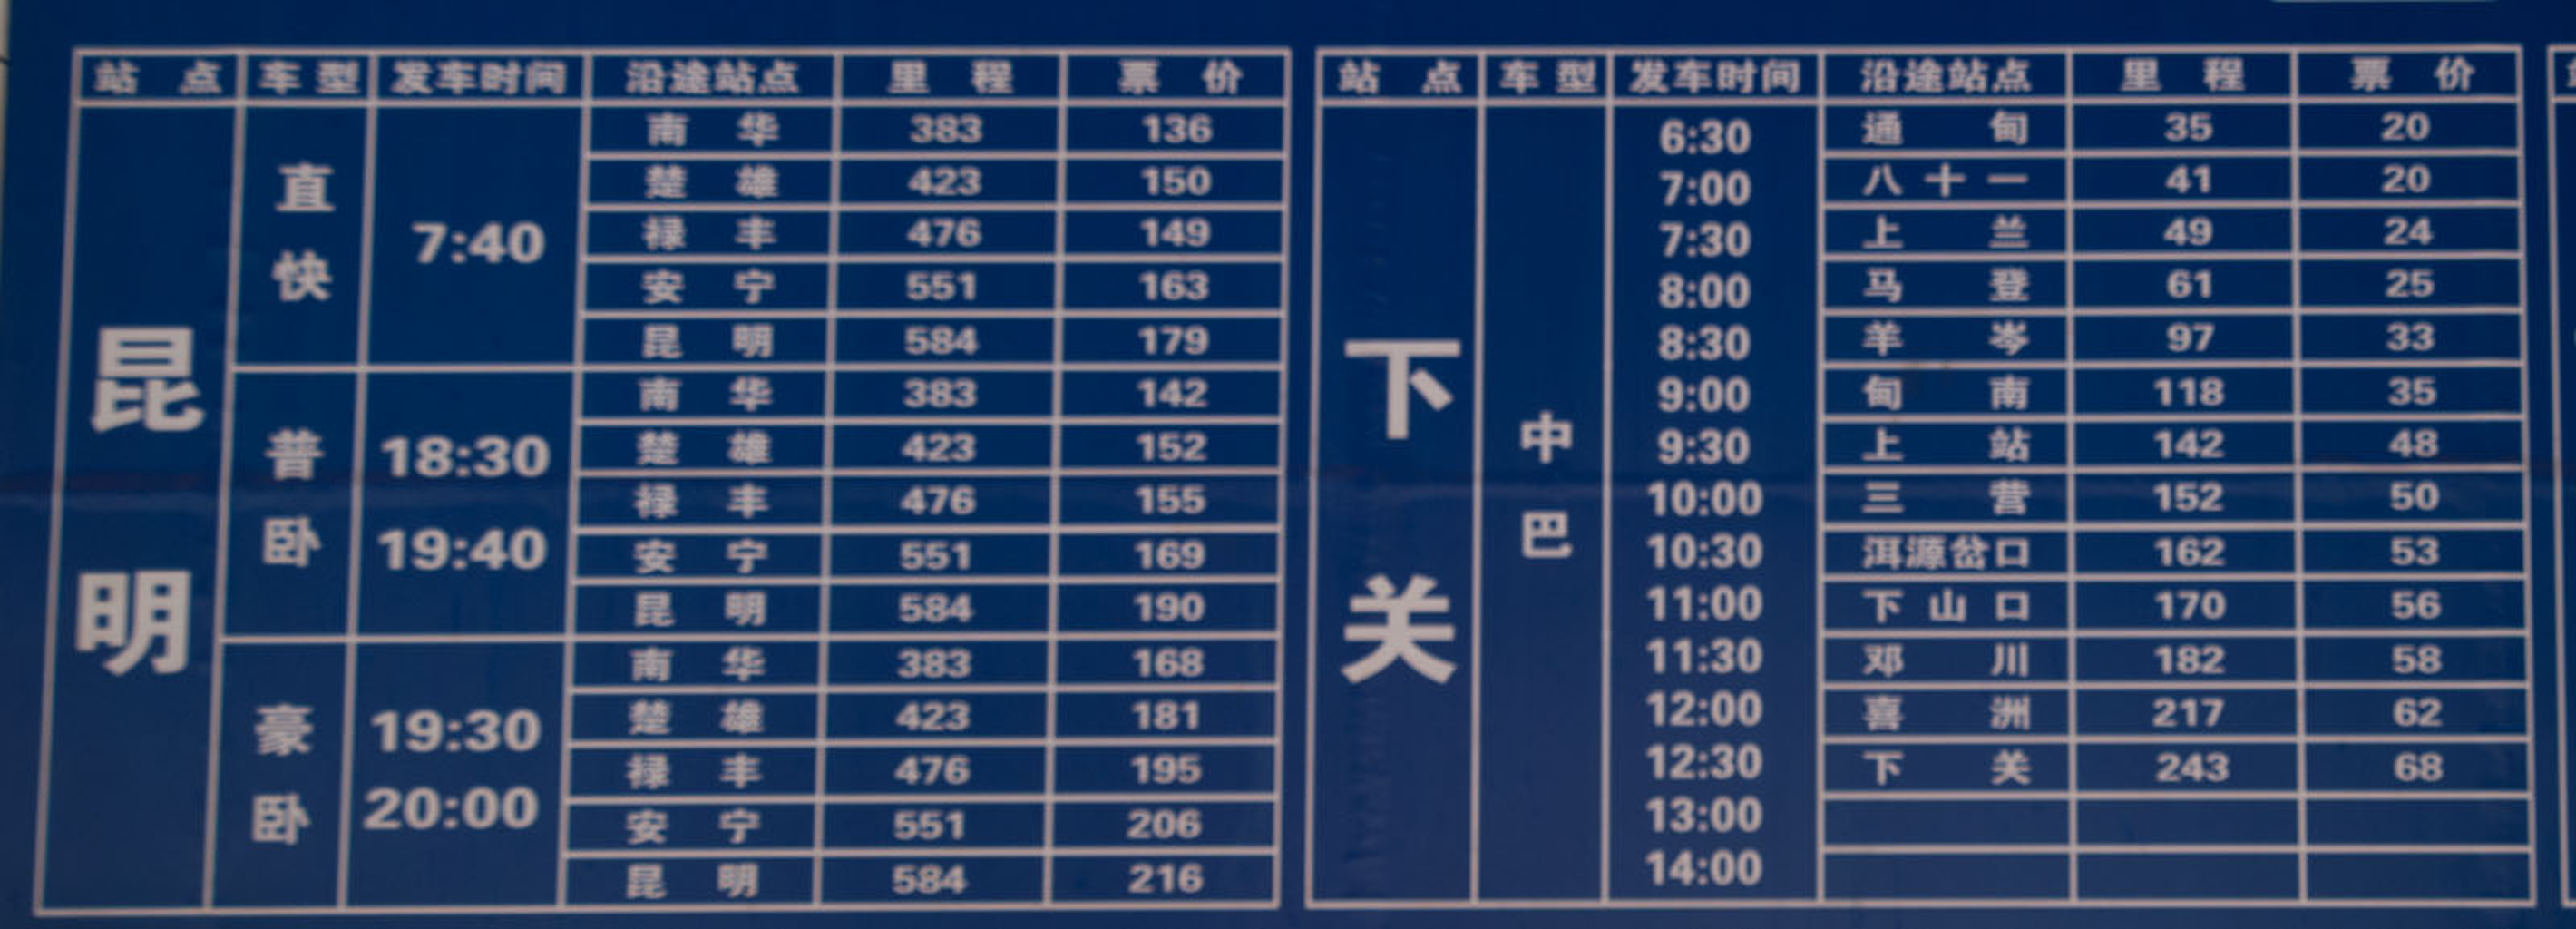 Picture: Busses to Kunming, Xiaguan, Liuku, Weixi. Minibusses to local places outside. 